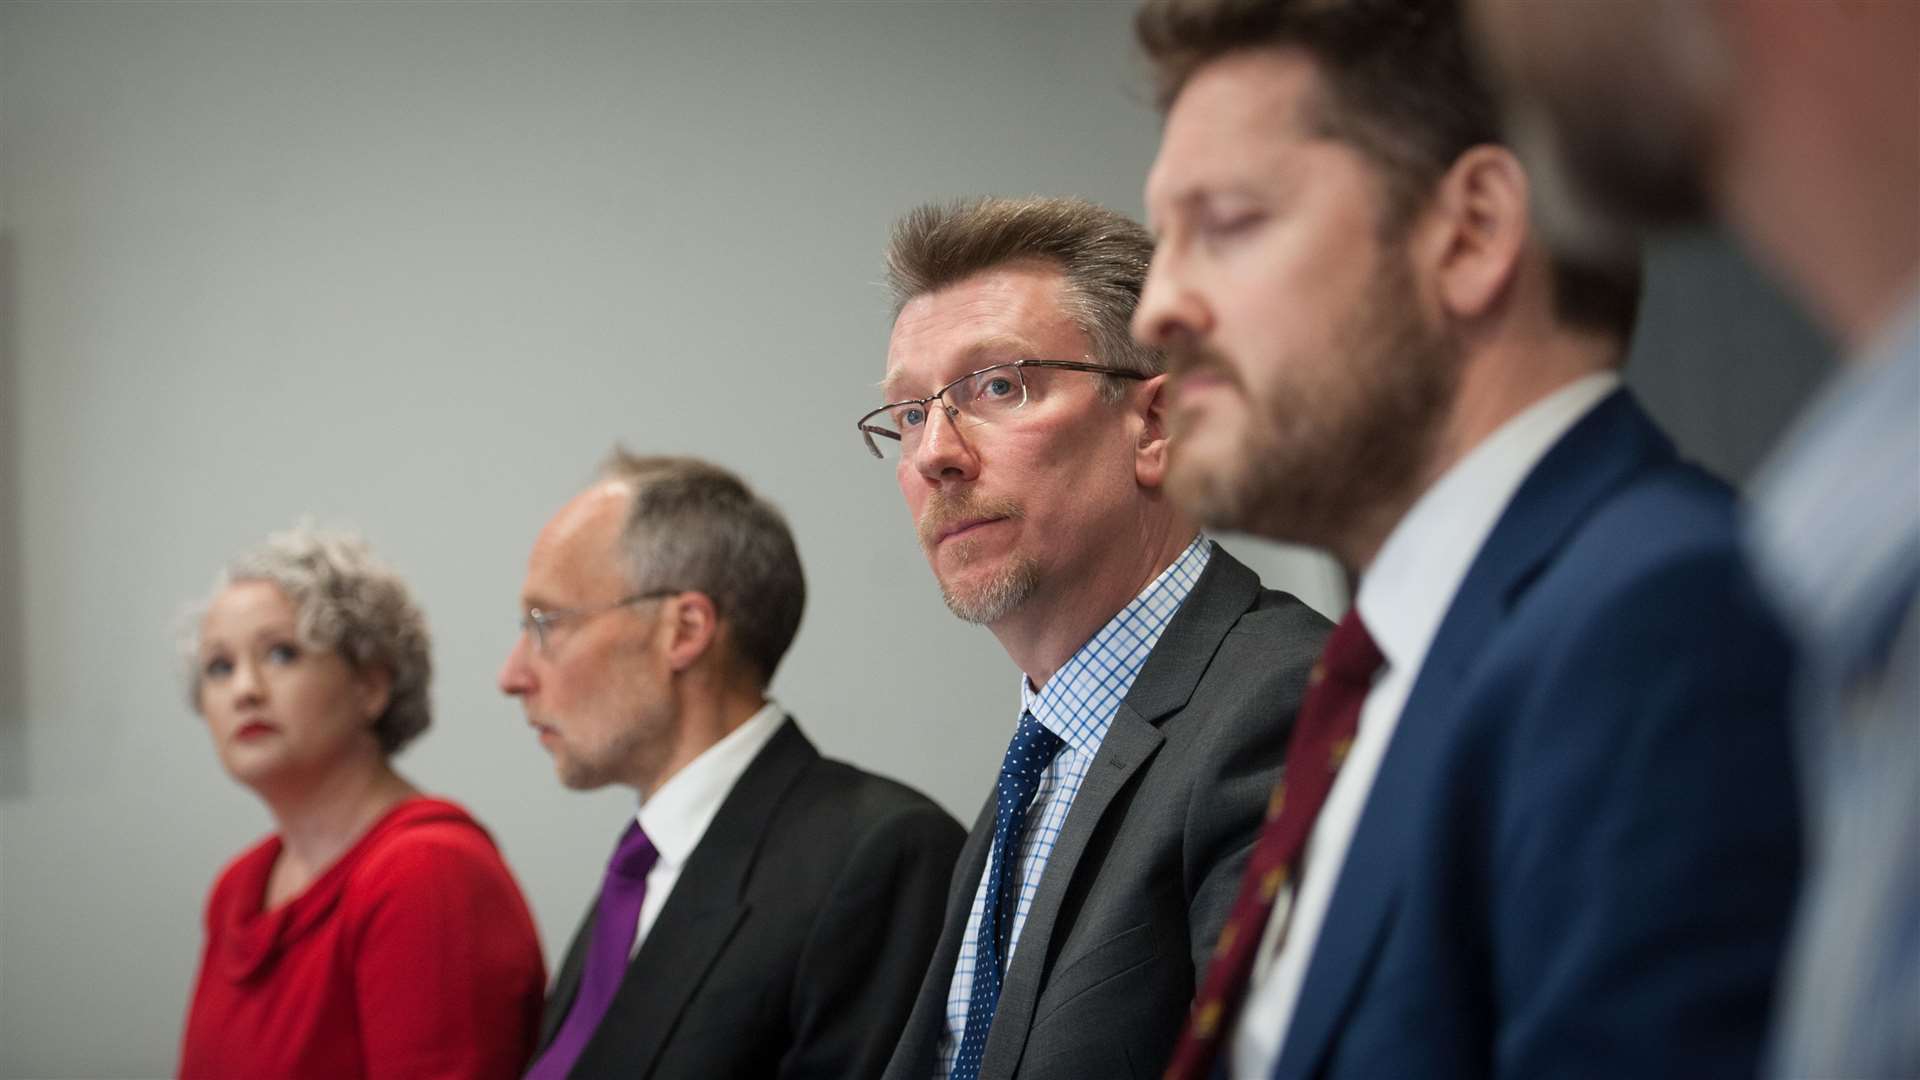 Dr Lorien Cameron-Ross, Dr Alistair Todd, Dr Jonathan Ball and Dr Iain Kennedy.